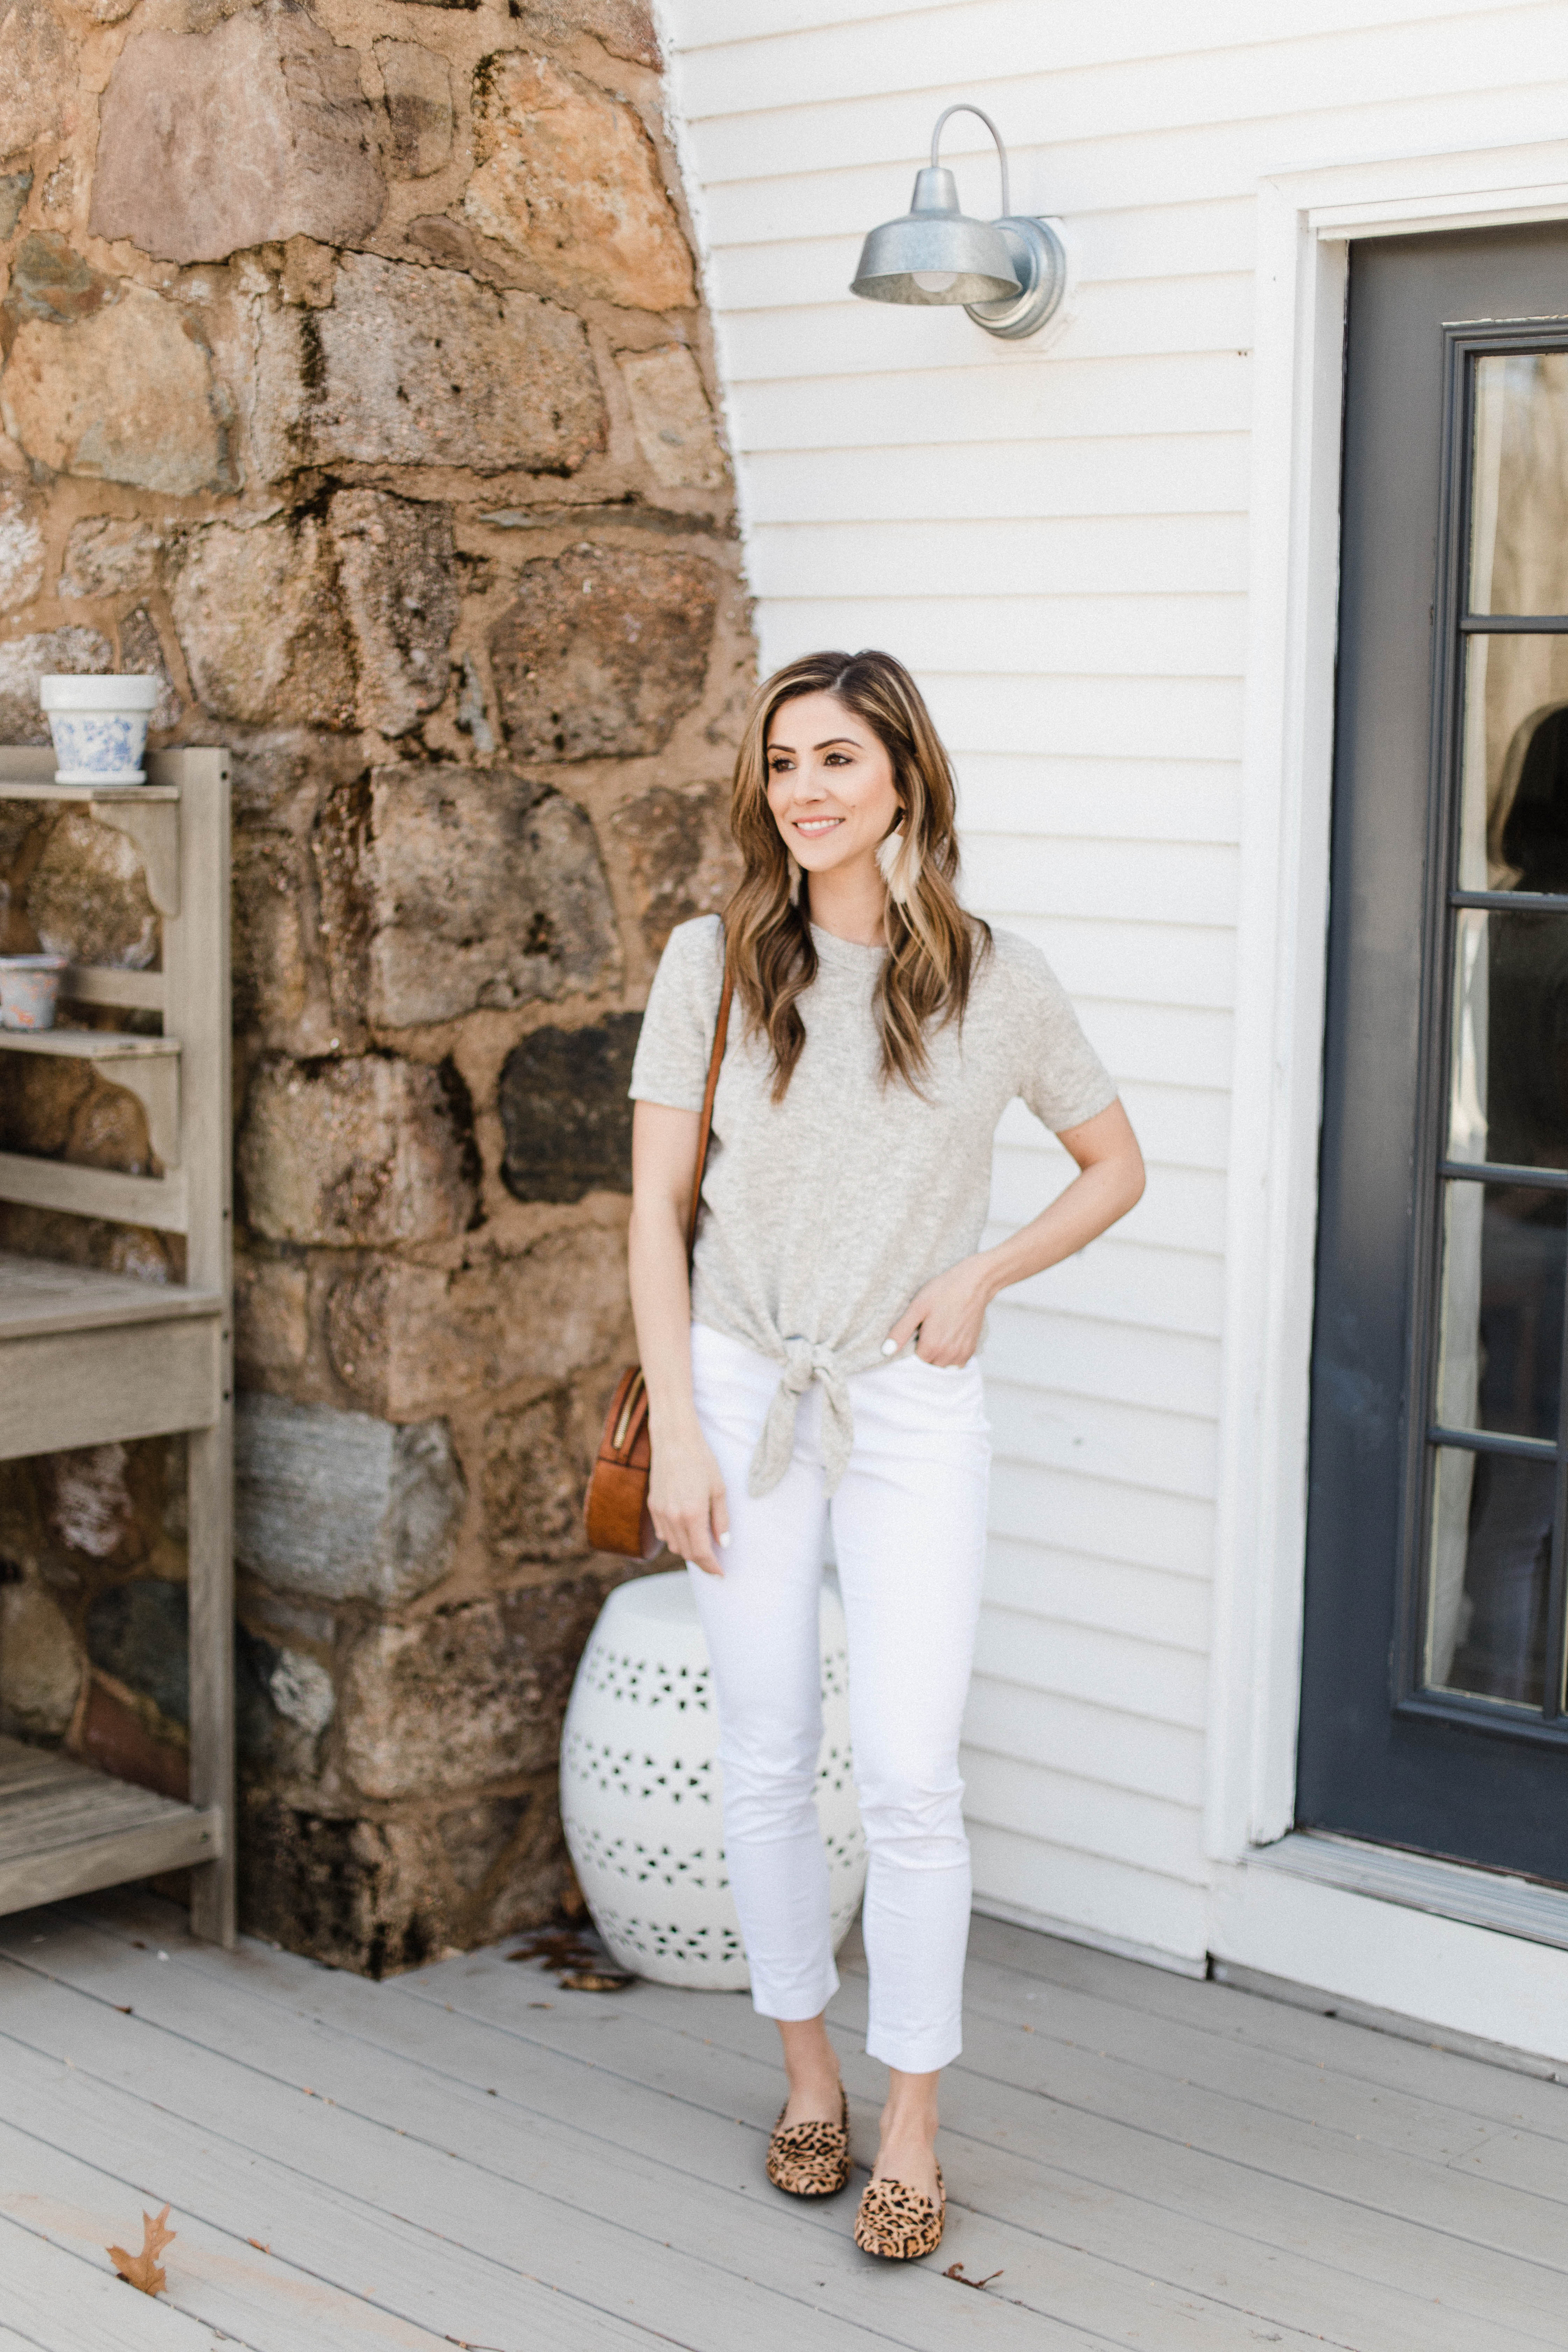 Connecticut life and style blogger Lauren McBride shares her Spring Shoes Capsule Wardrobe featuring 6 different shoe style options that are versatile for the season.